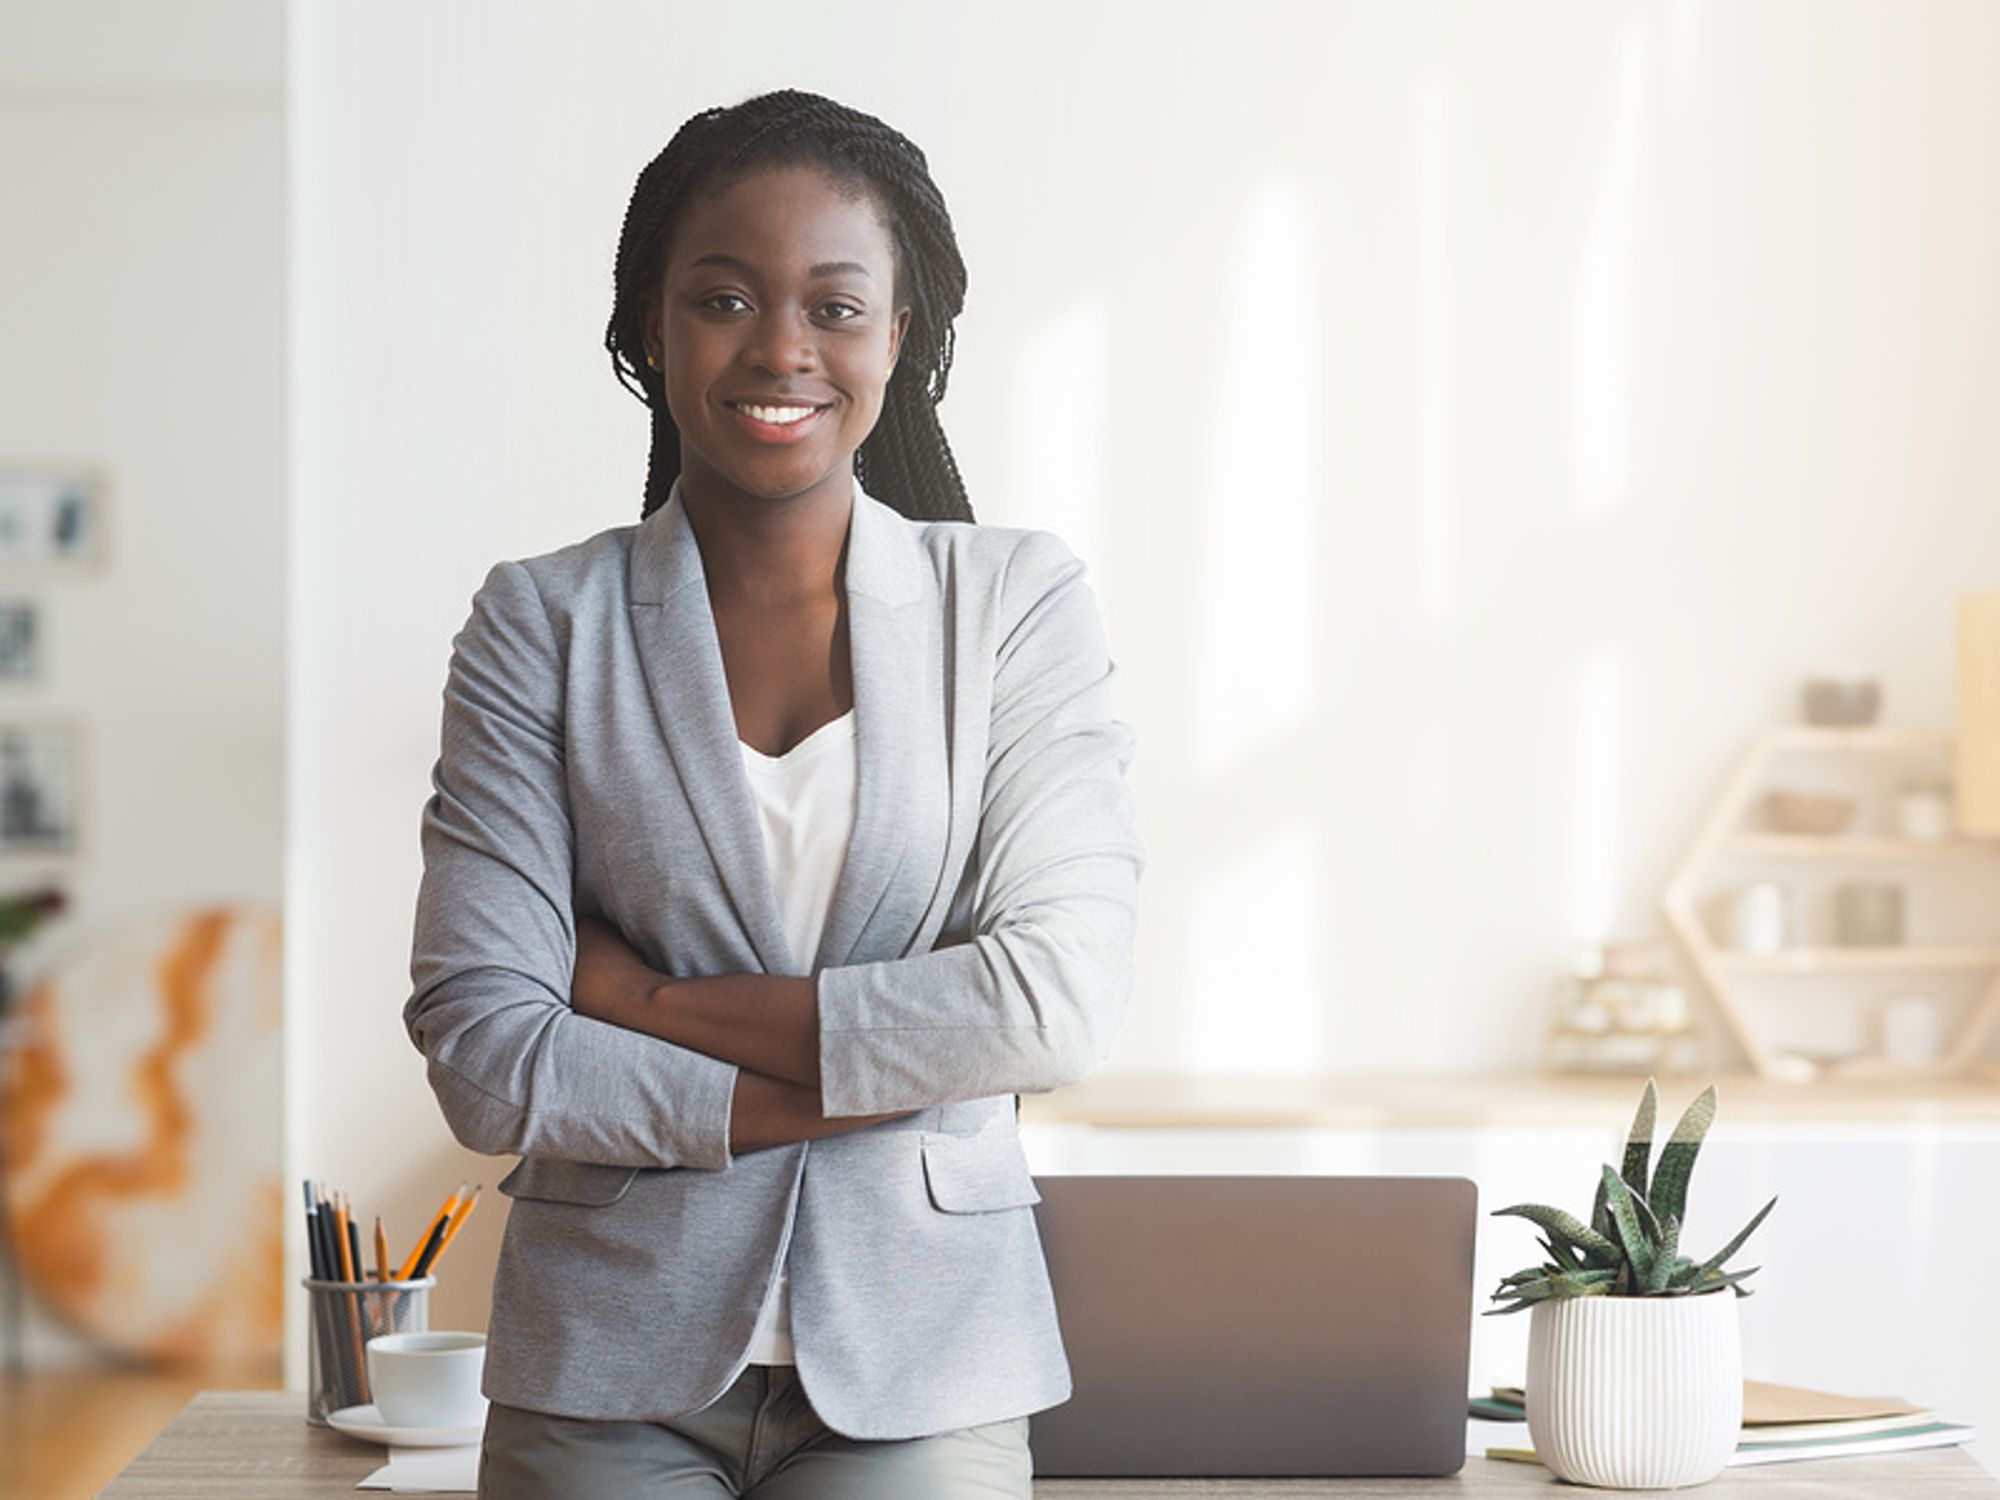 Professional woman is an indispensable employee at work